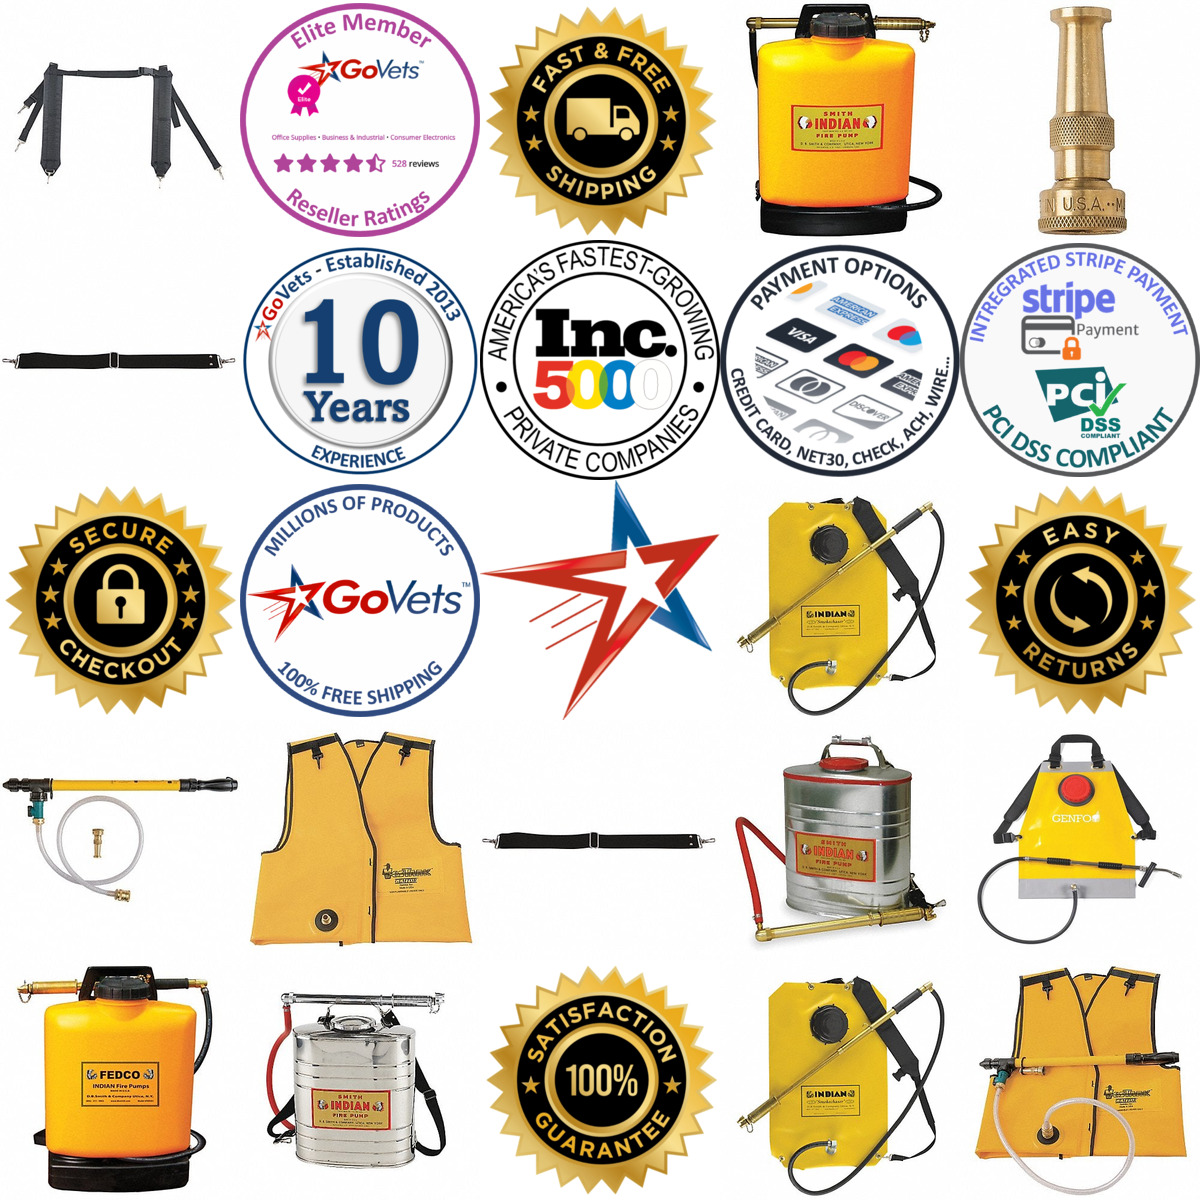 A selection of Wildland Fire Pumps products on GoVets